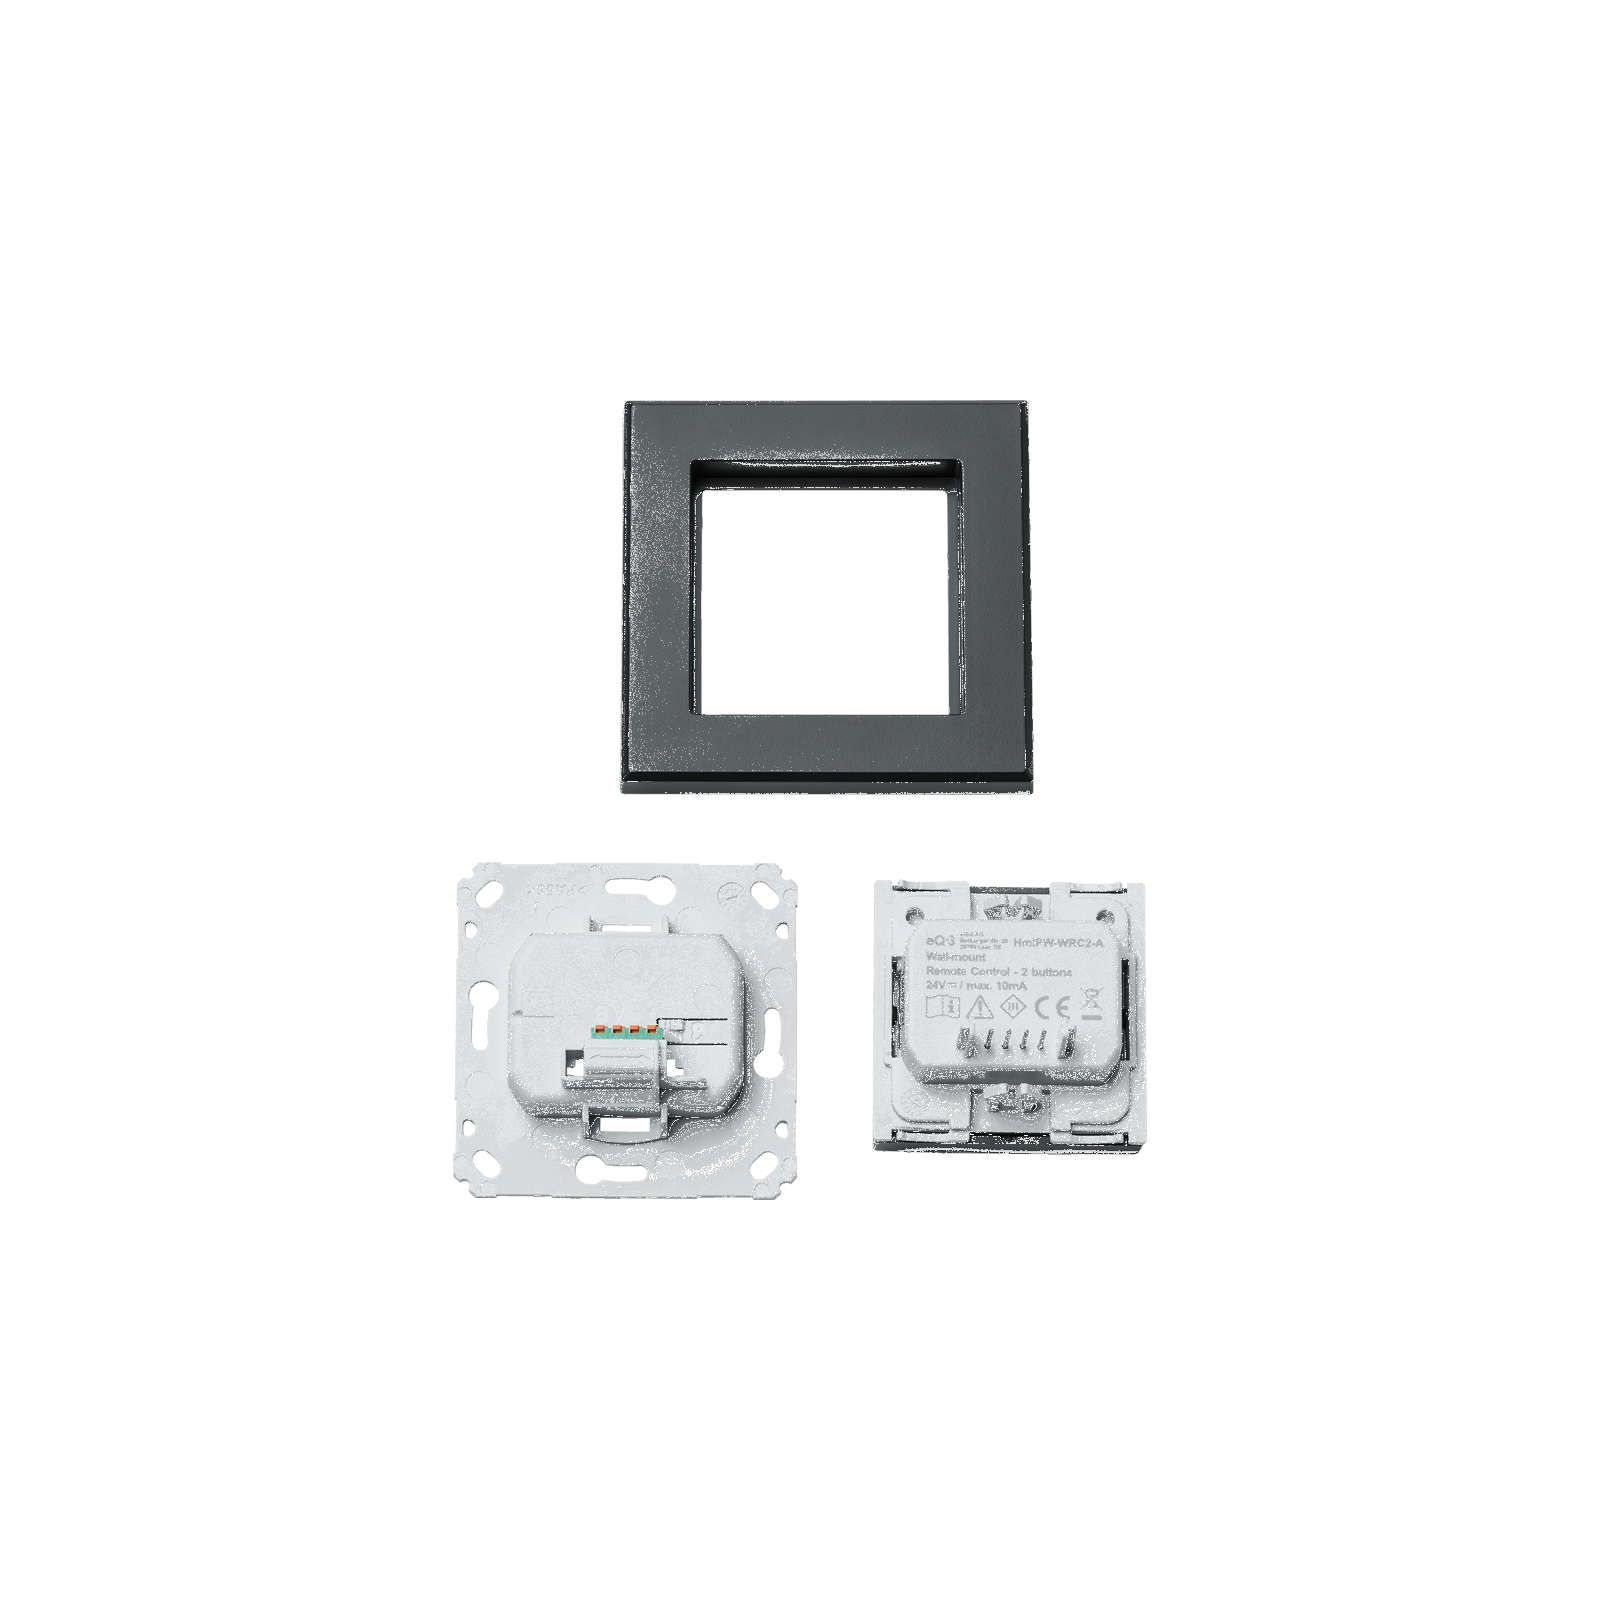 Homematic IP Wired Smart Home Wandtaster HmIPW-WRC2-A - 2-fach anthrazit